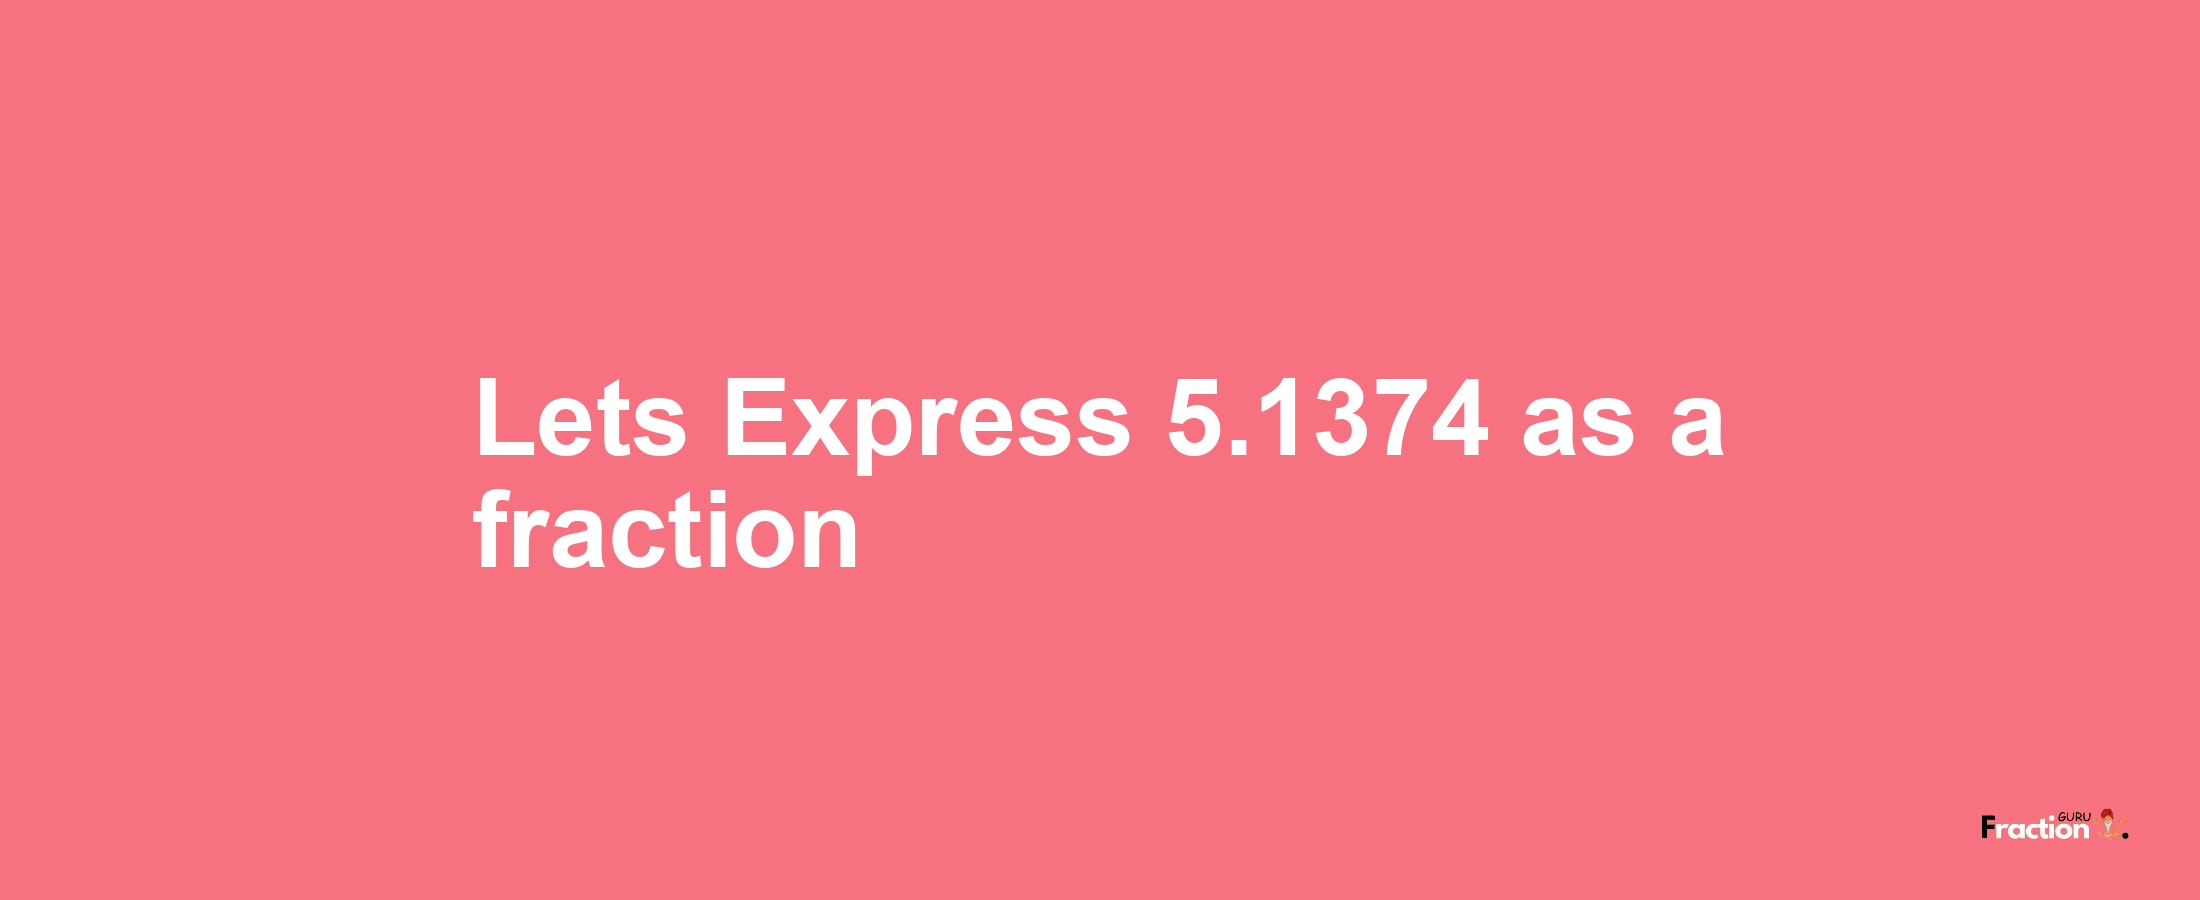 Lets Express 5.1374 as afraction